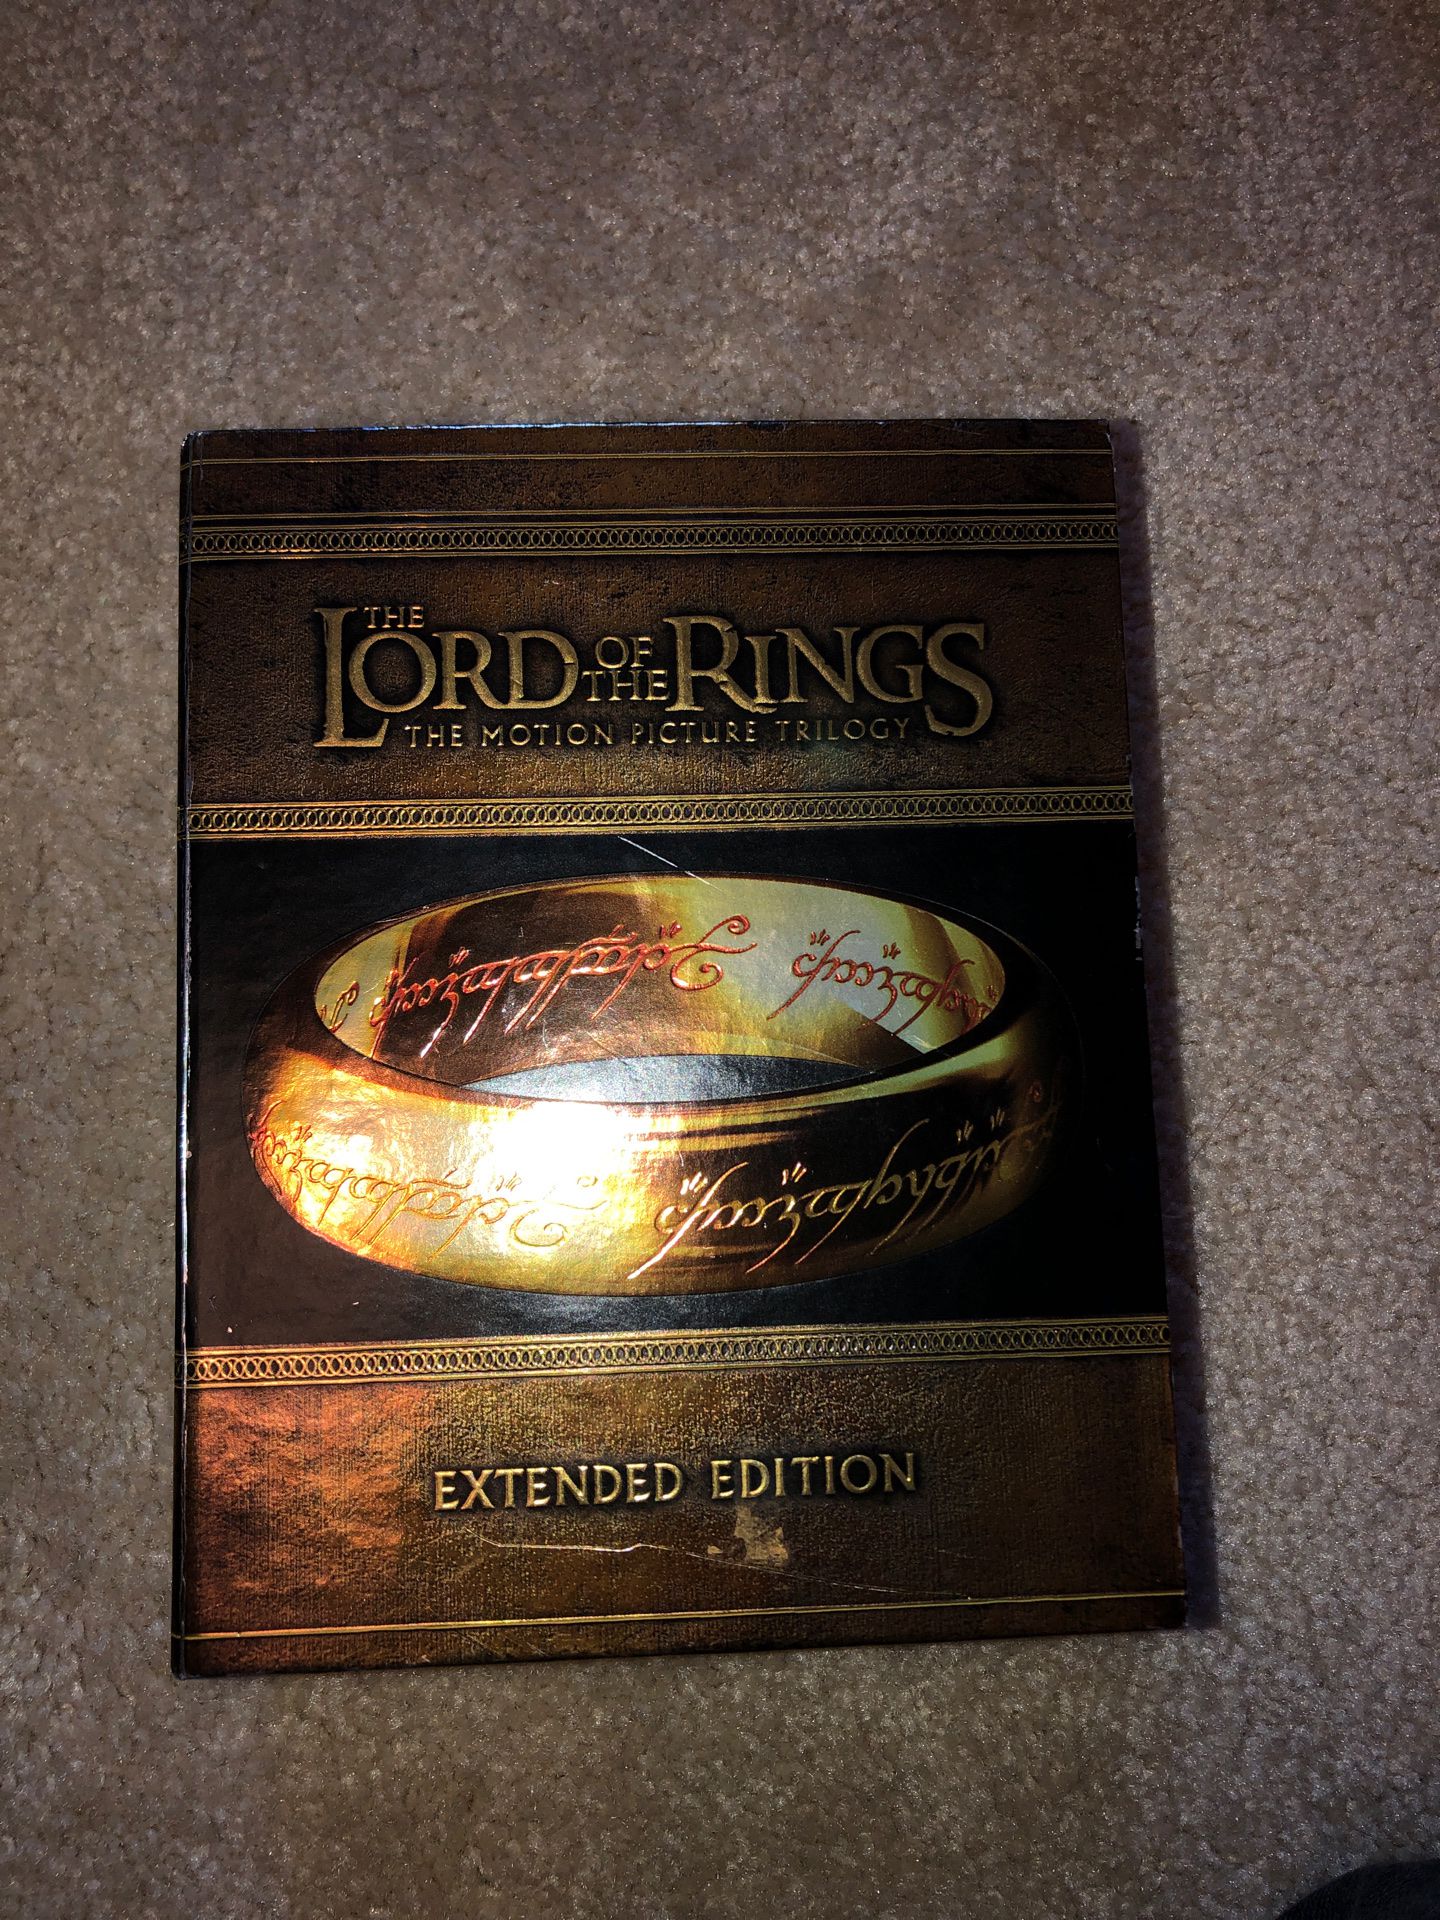 Lord of the Rings Trilogy: Extended edition box set